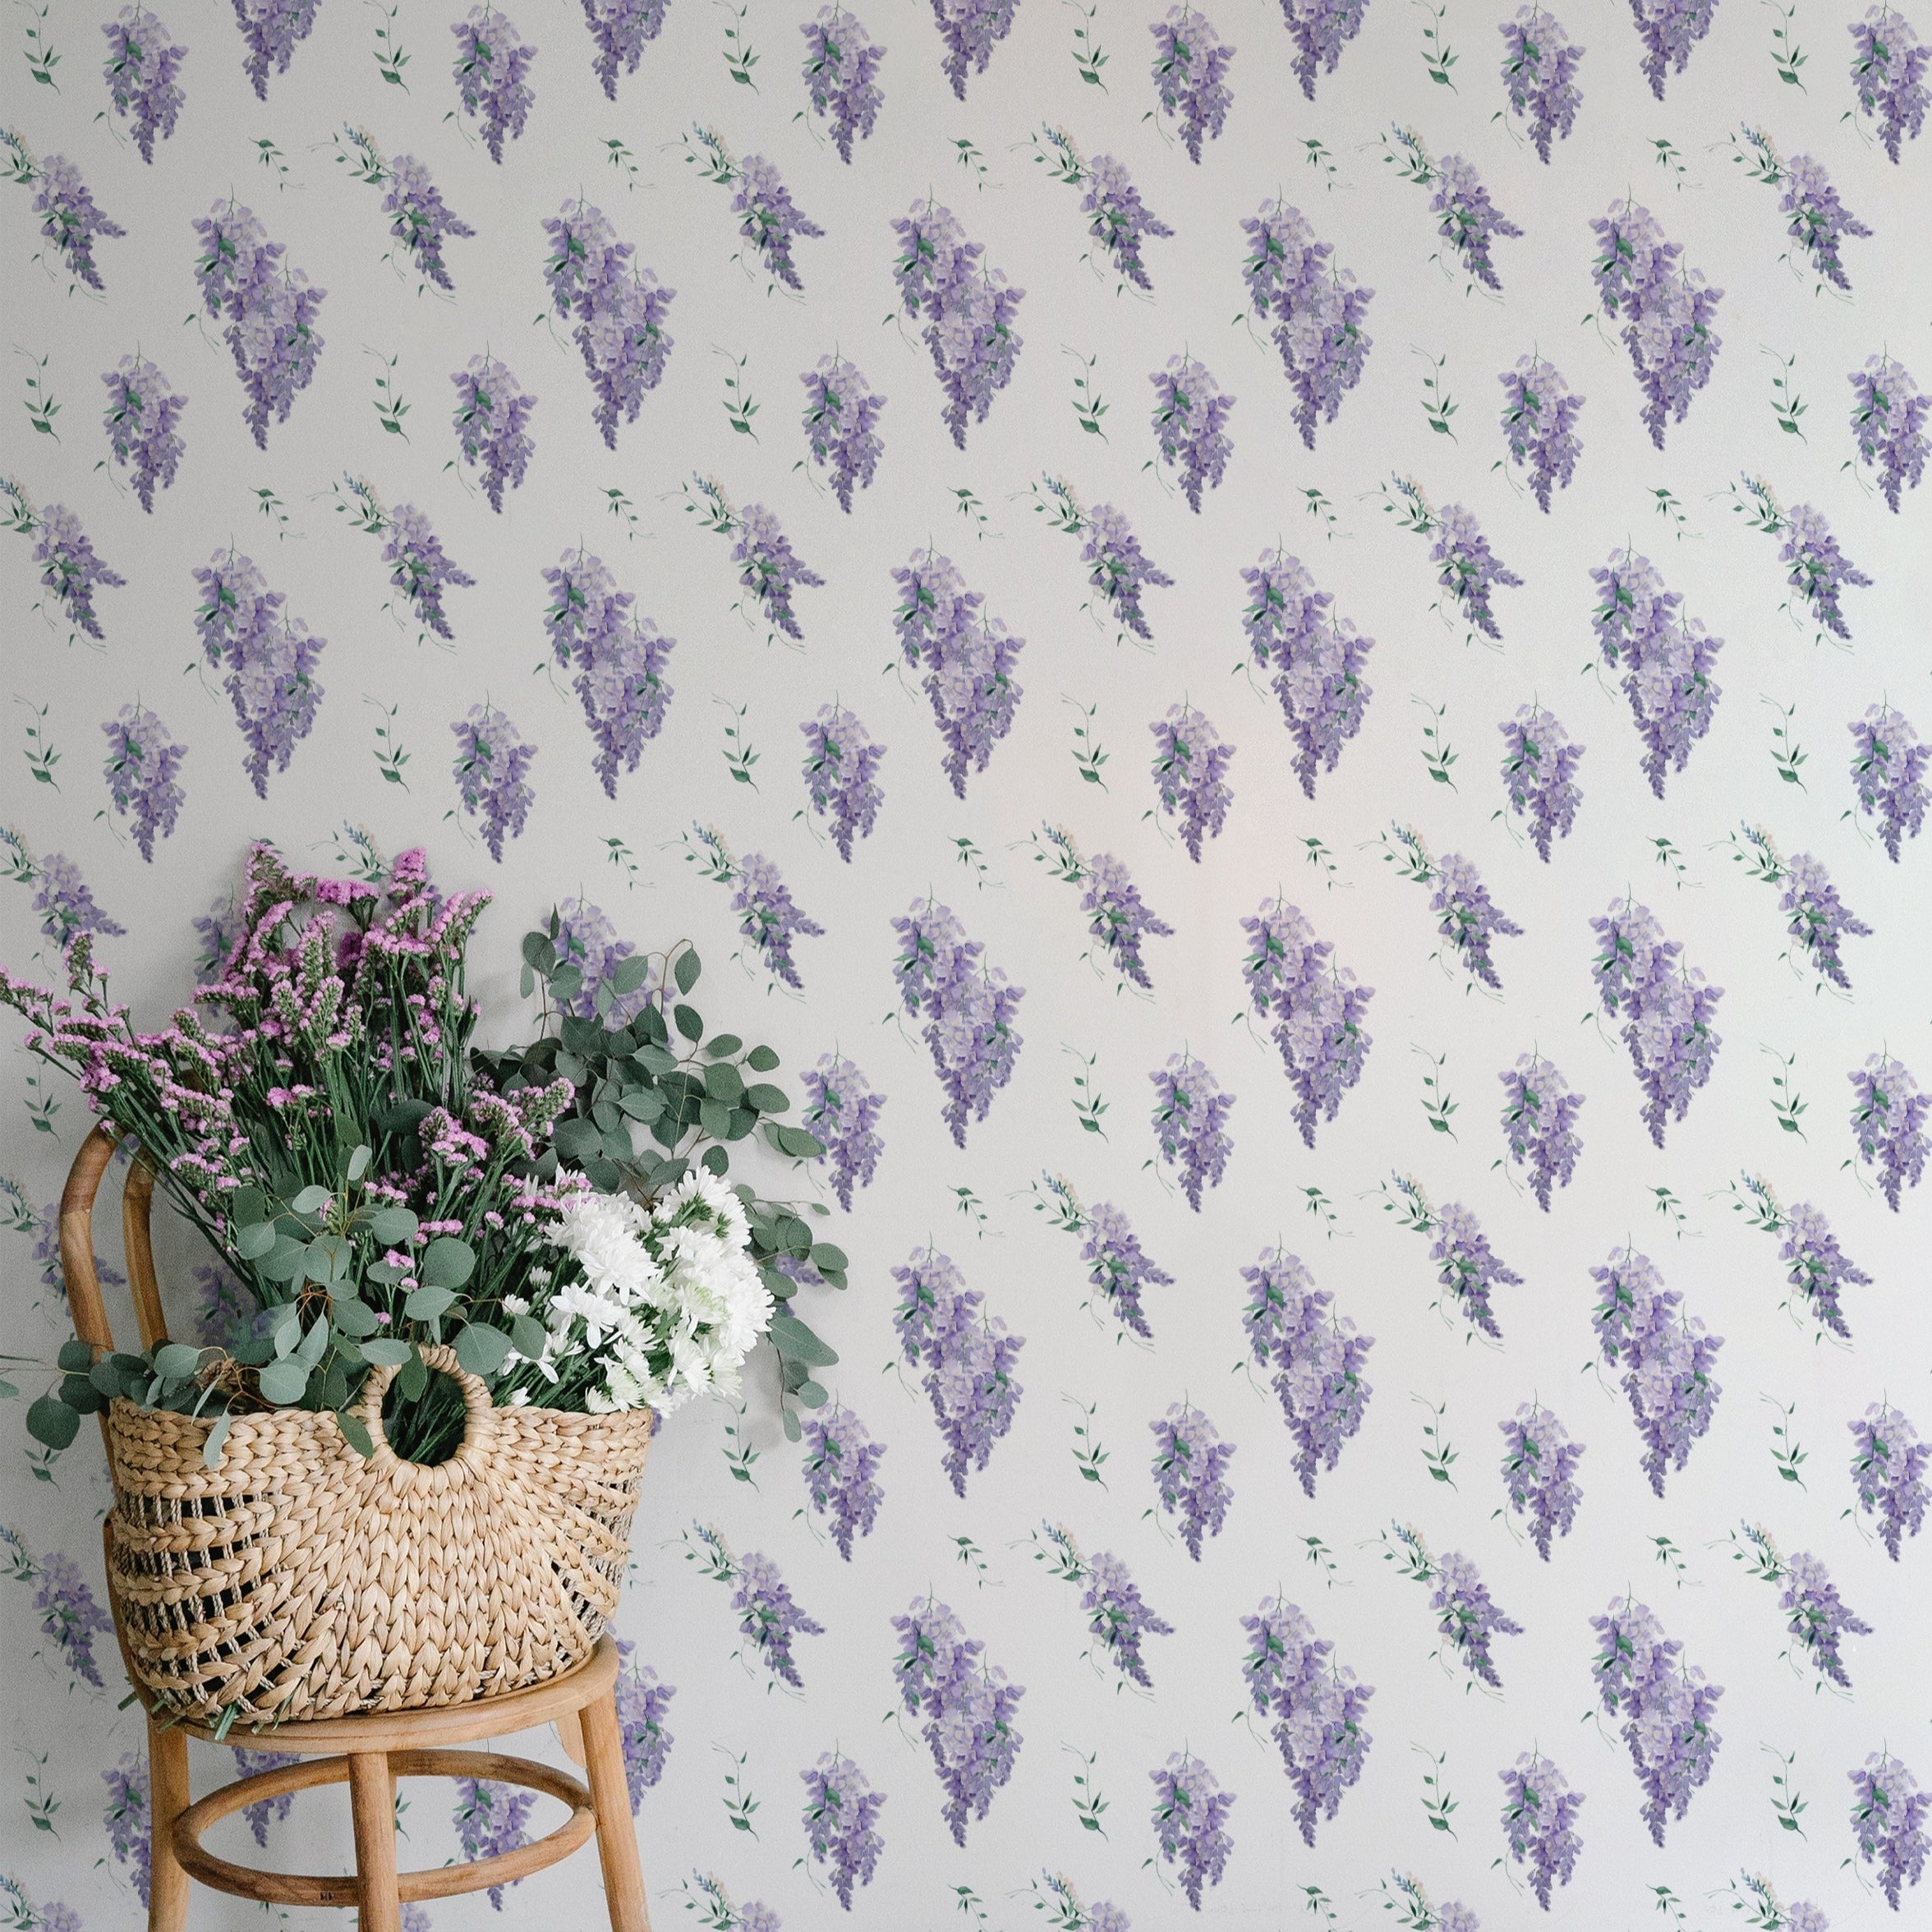 A charming interior setting with the Wisteria Garden Wallpaper as the backdrop. A rustic woven basket filled with a variety of fresh greenery and flowers sits on a wooden chair, highlighting the natural theme.